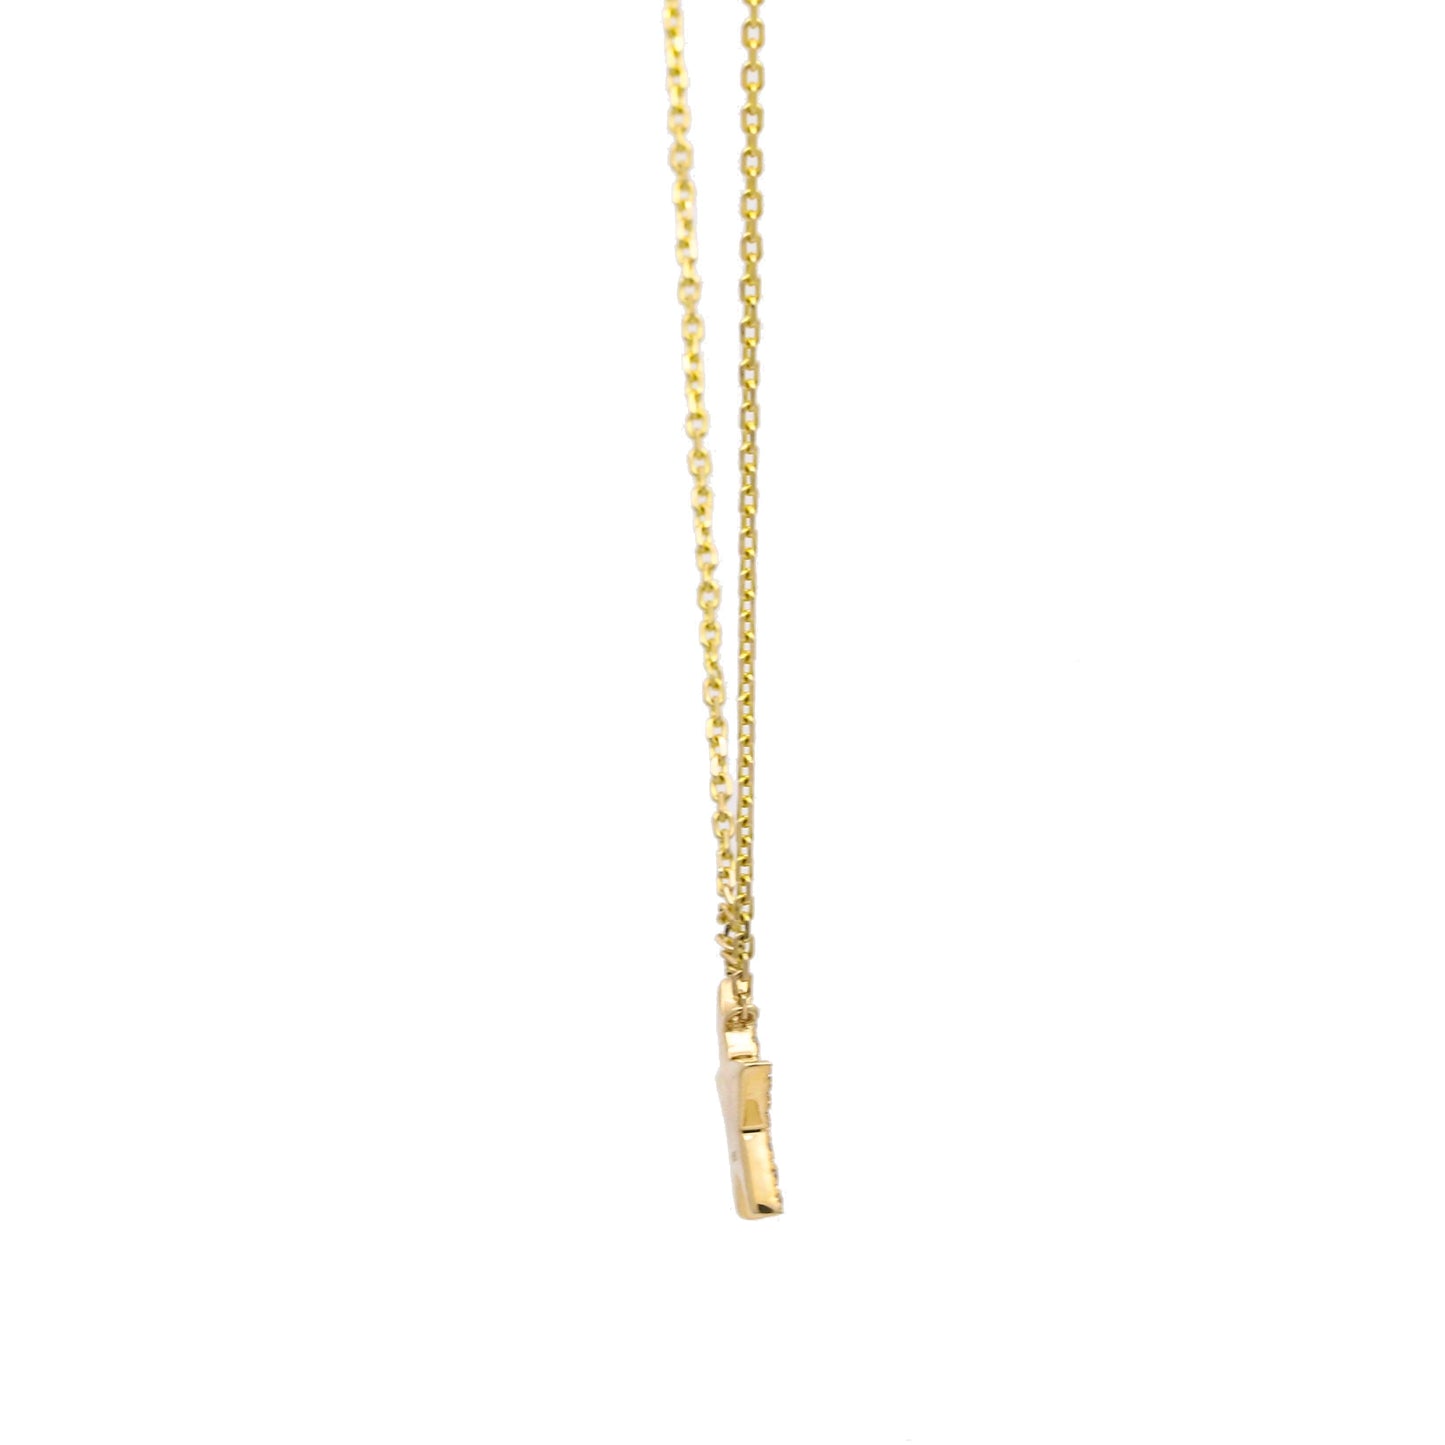 Women's Pave Diamond Star Pendant Necklace in 14k Yellow Gold - 31 Jewels Inc.